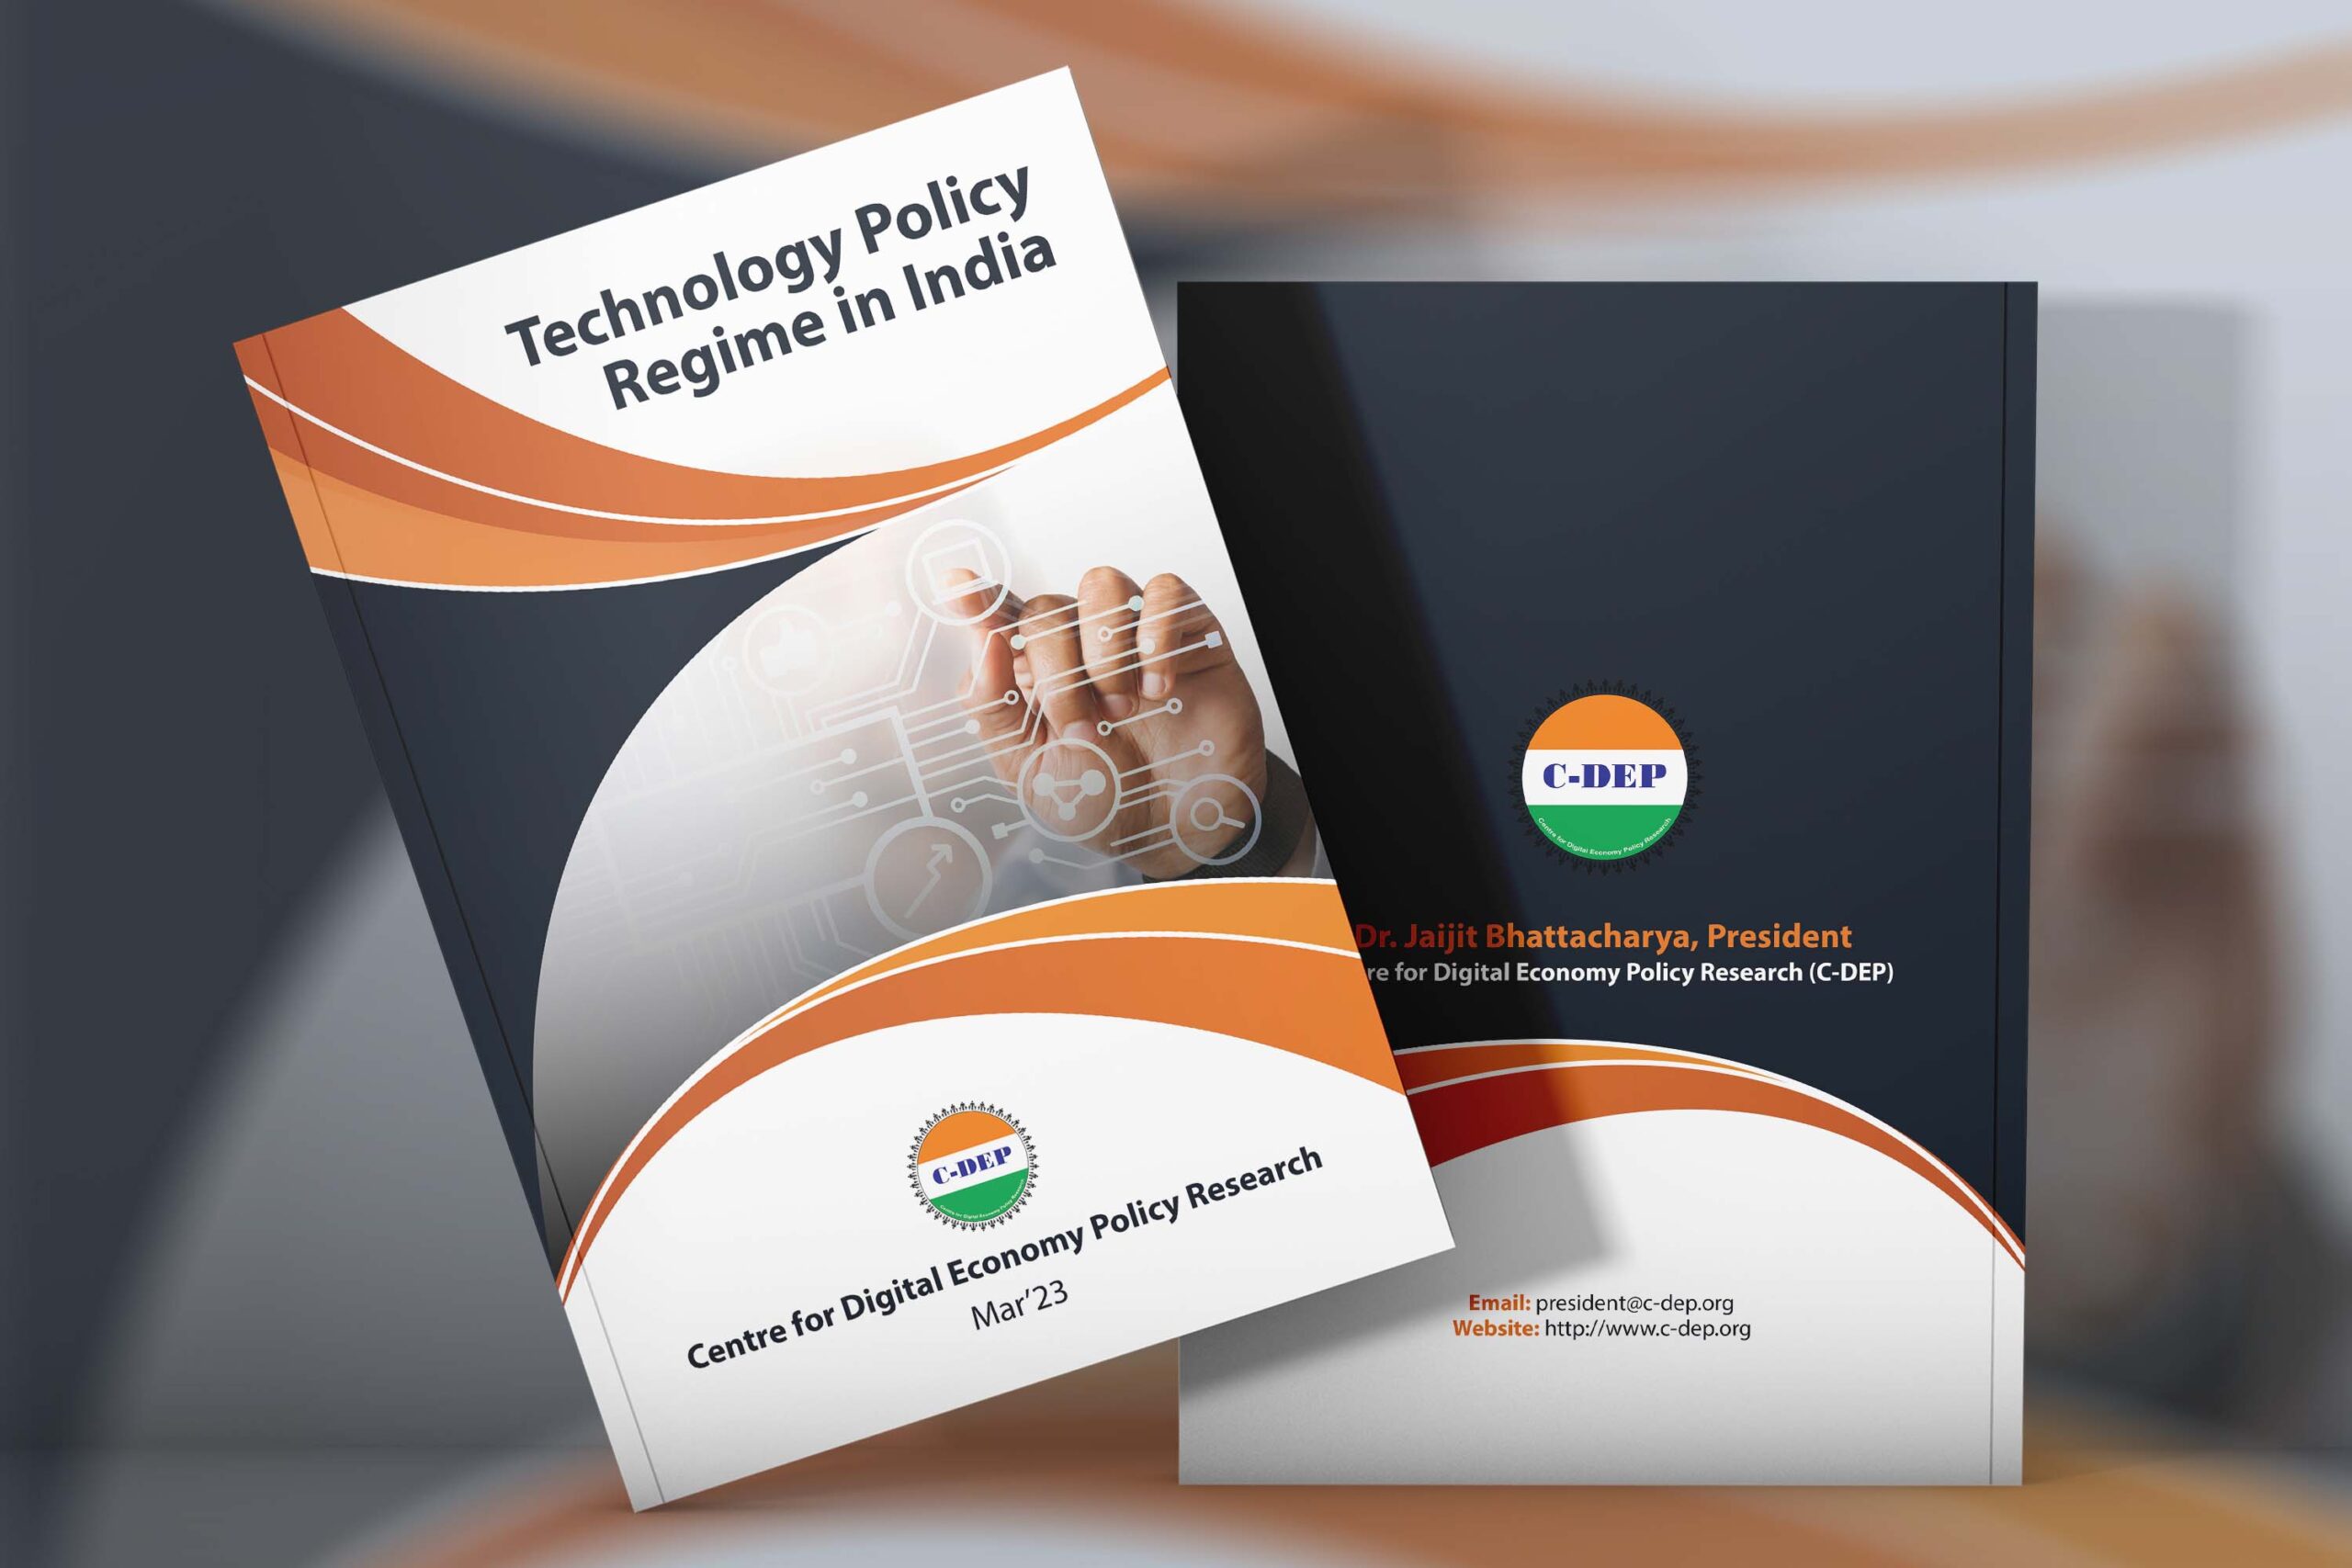 Technology Policy Regime in India